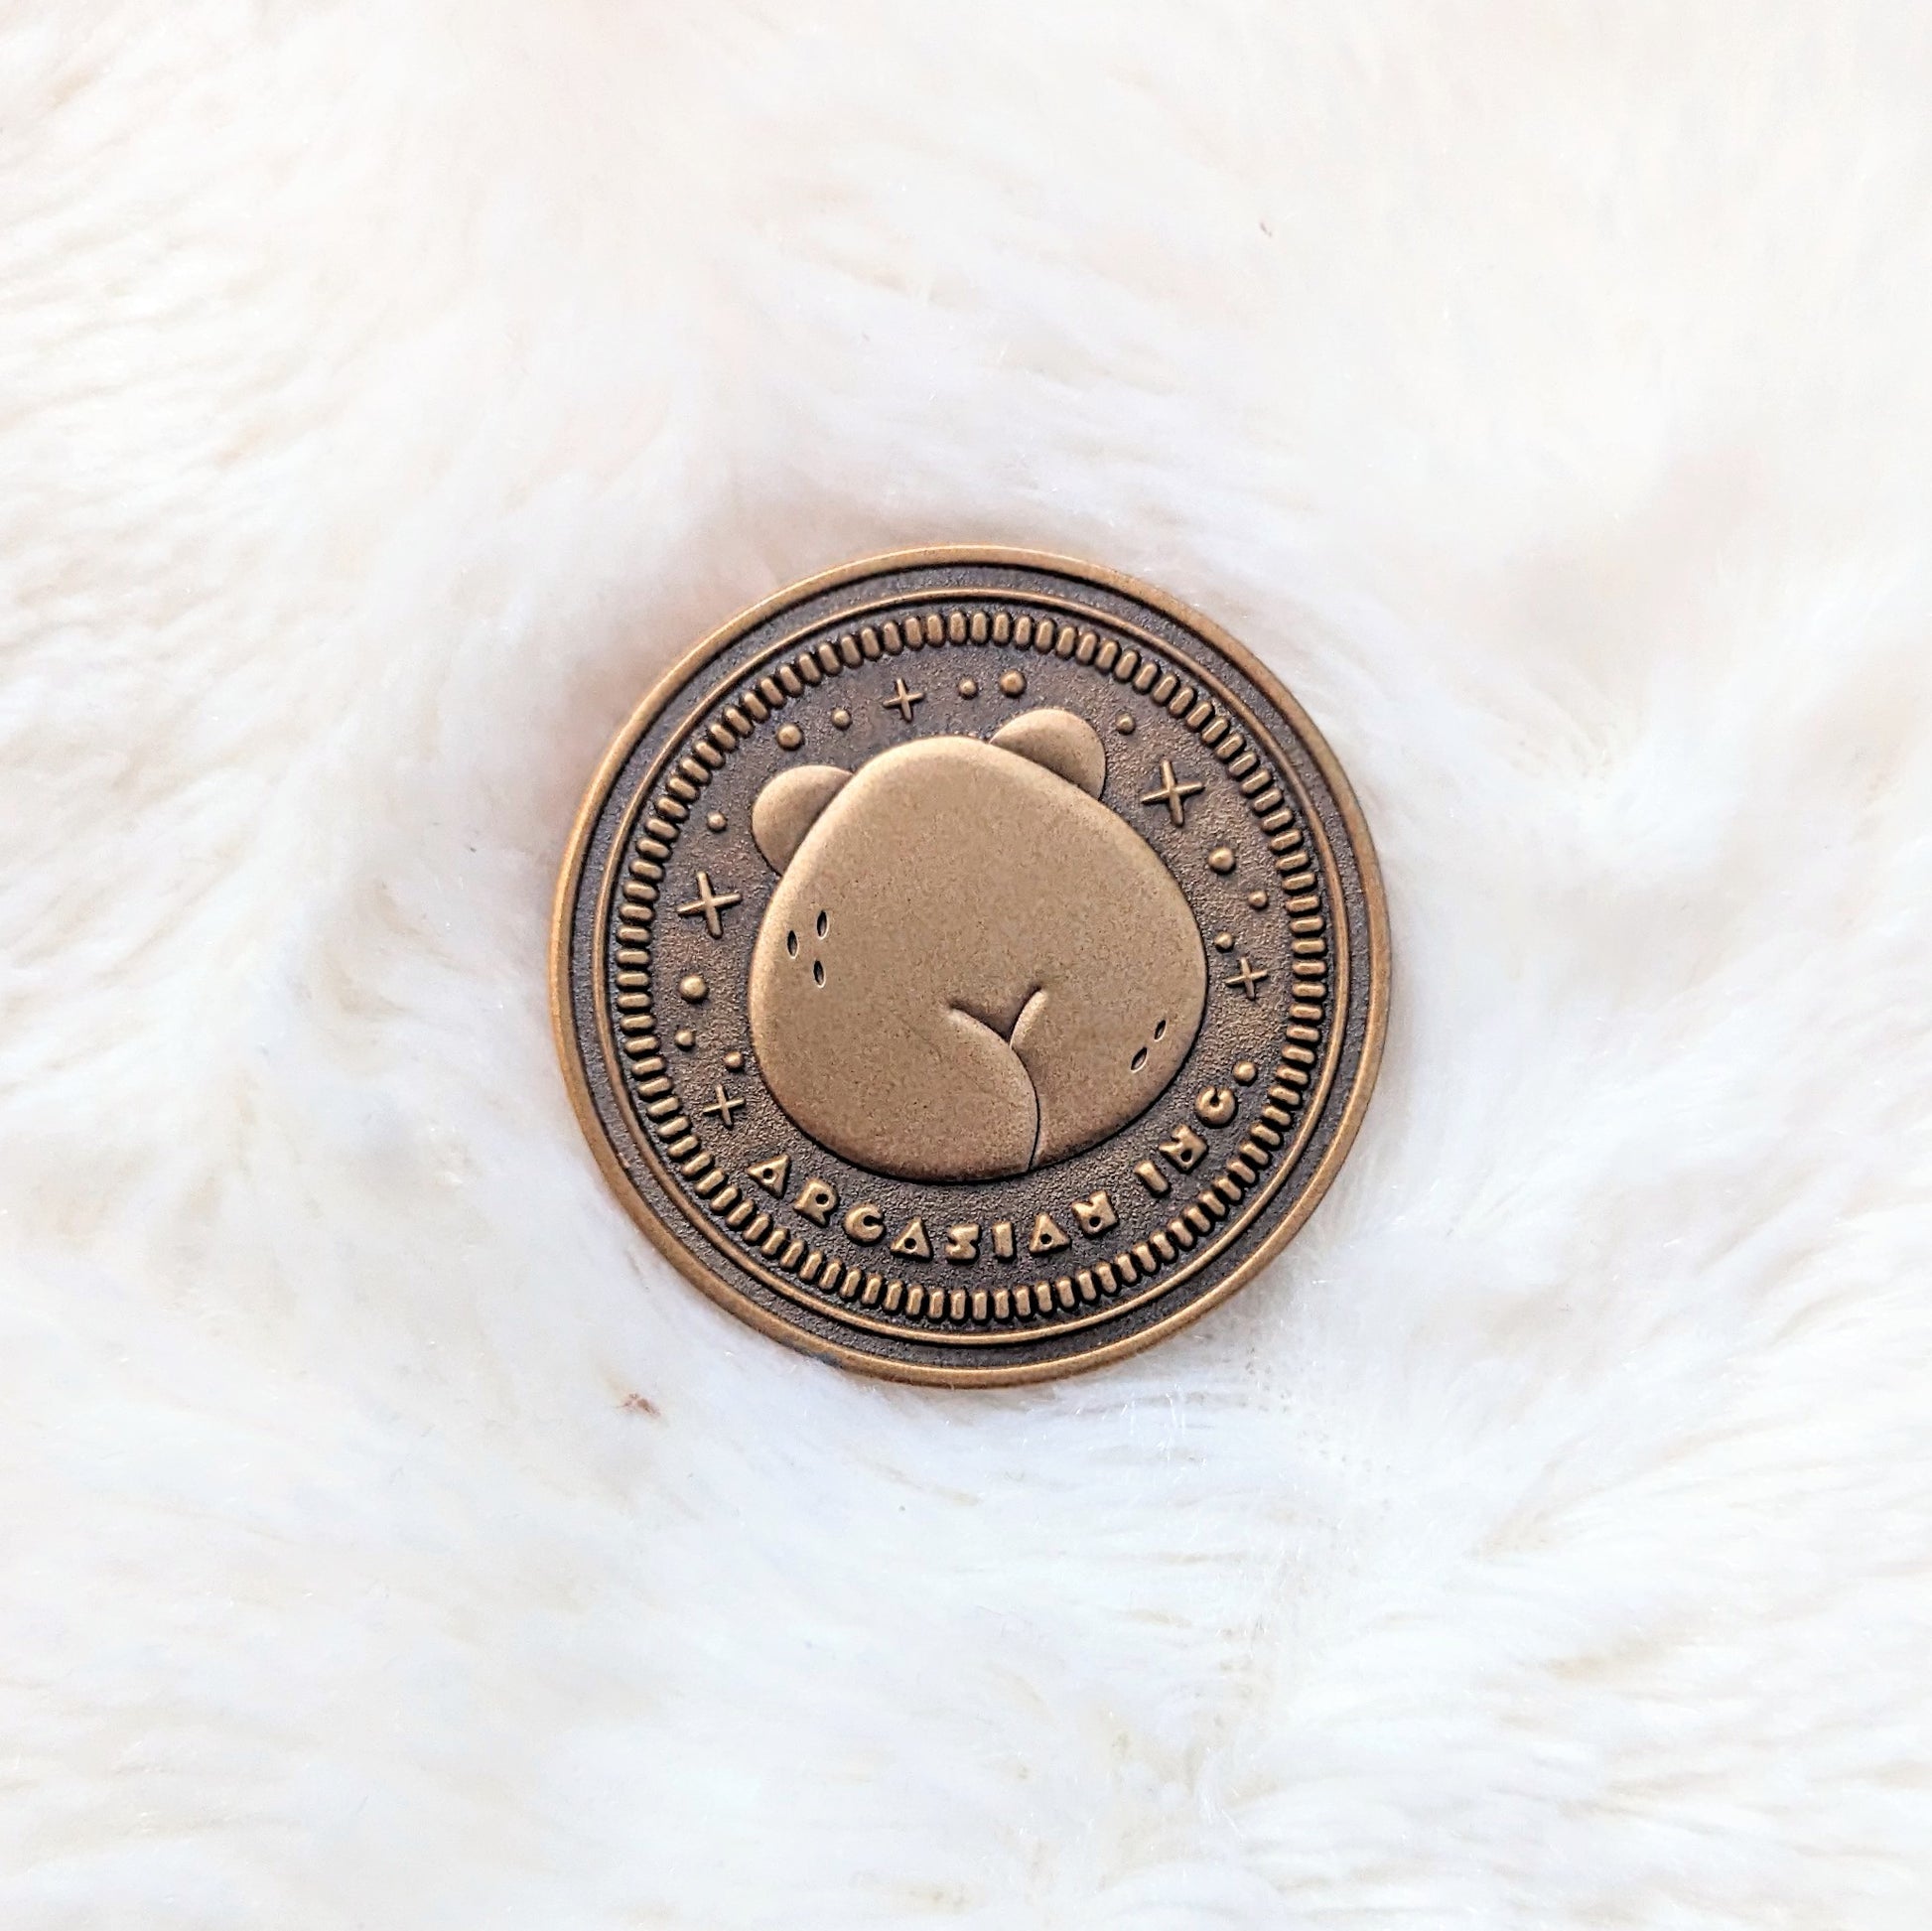 A photo of the backside of a zinc alloy coin with an antique gold finish. The design features the backside of a bear including a cute butt crack and text under the bear that reads "Arcasian Inc."